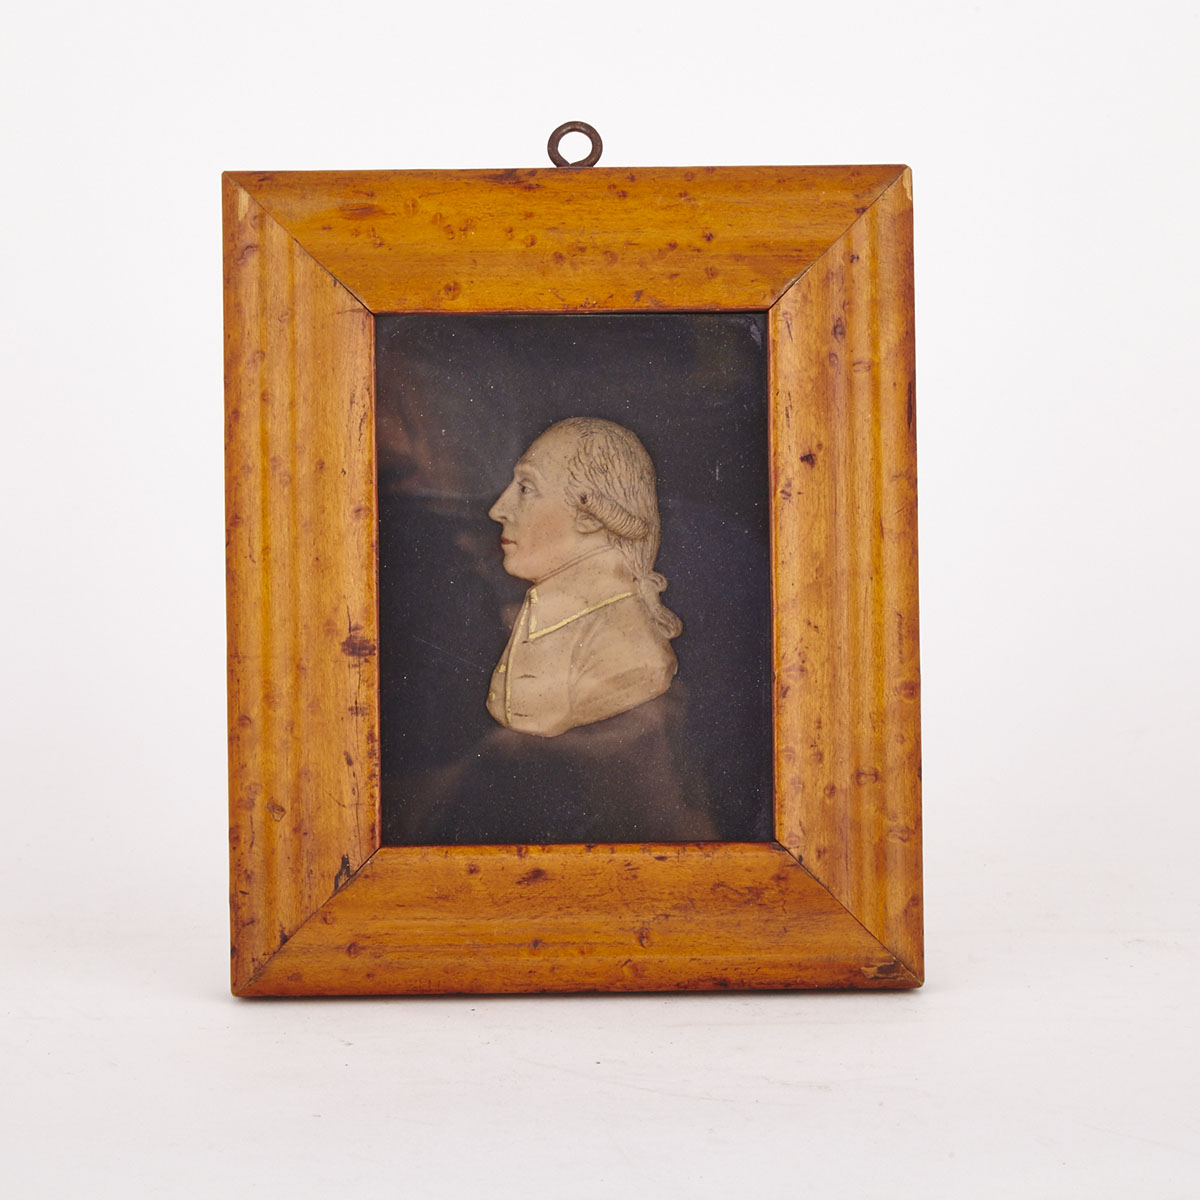 After James Tassie, (Scottish, 1735-1799) Wax Relief Portrait of Joseph Black, MD., early 19th century